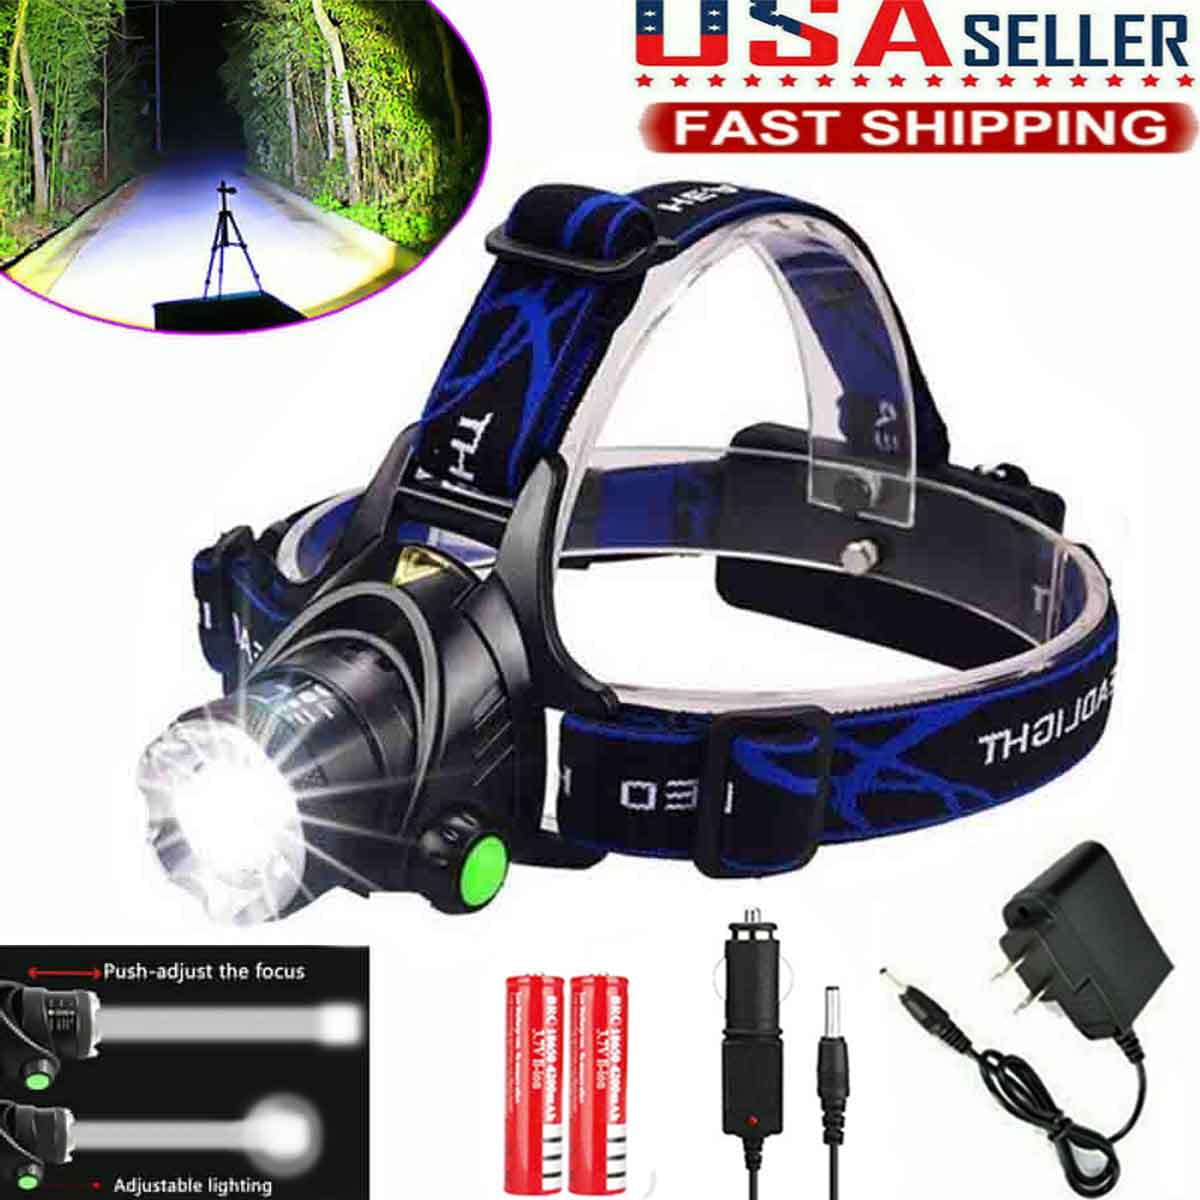 Bright 990000LM T6 LED Headlamp Headlight Head Zoom Torch 18650 Chargeable 